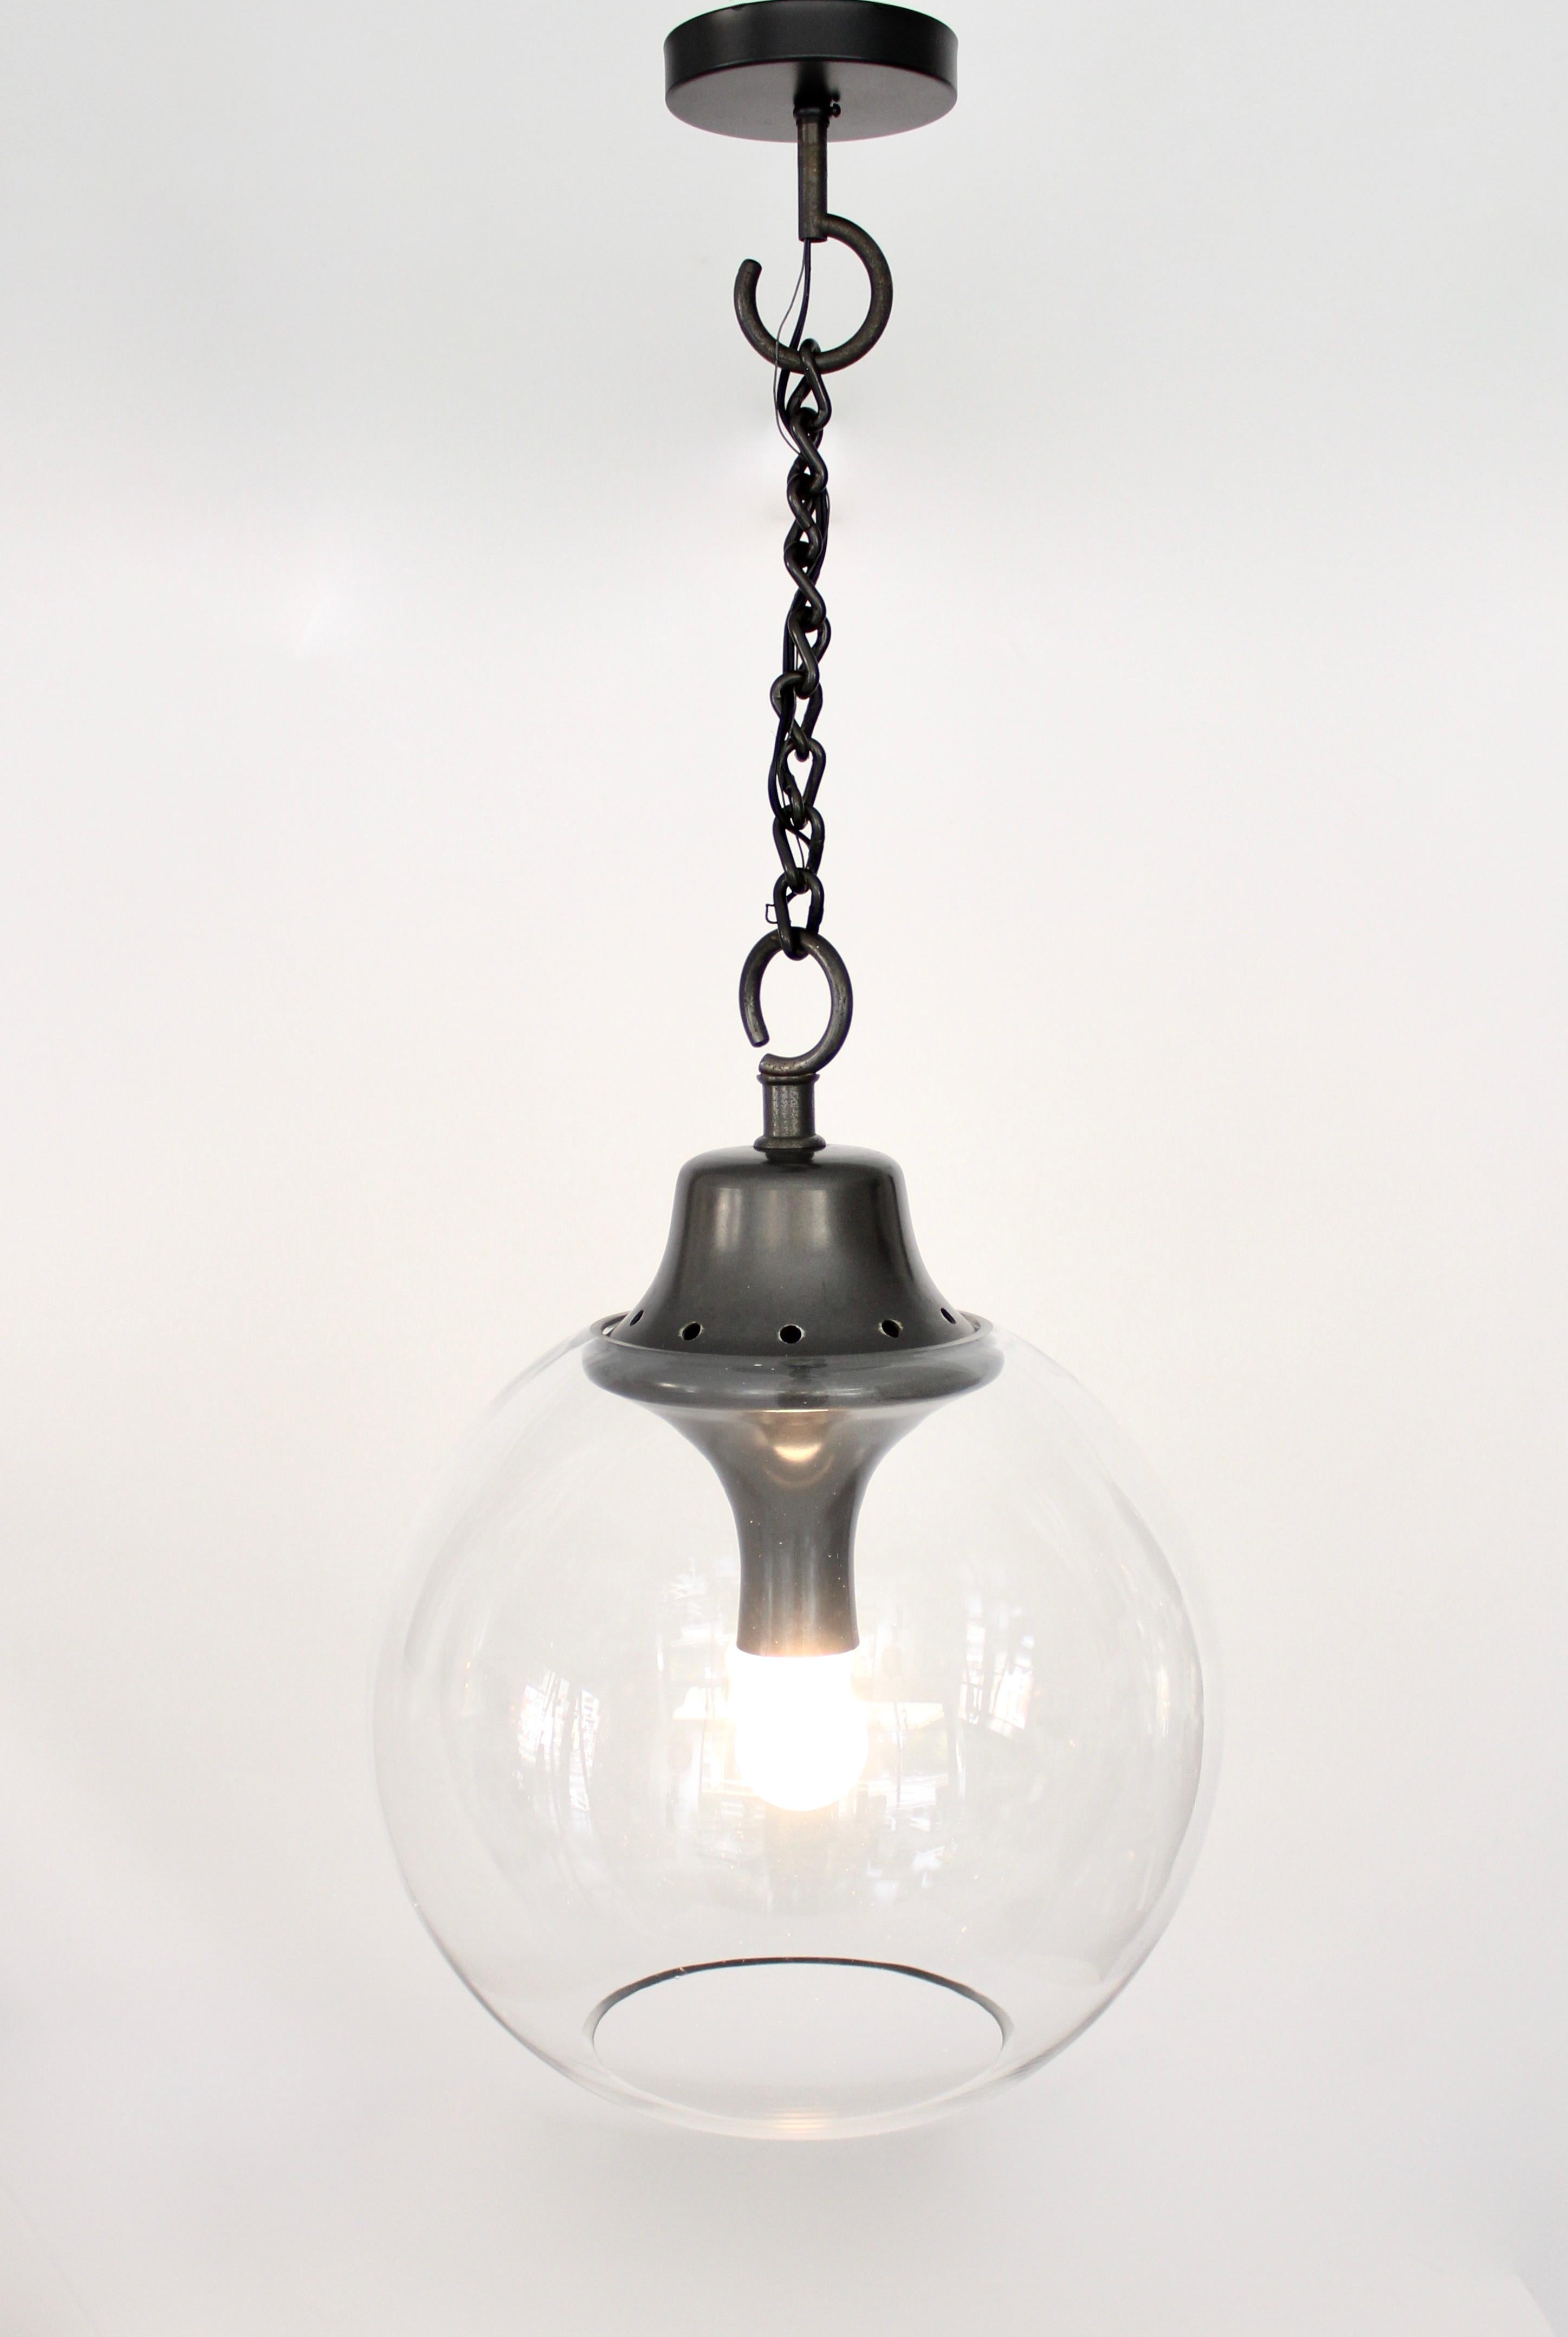 Luigi Caccia Dominioni Boccia LC10 Pendant Chandelier for Italian Maker Azucena
The design of this lamp is incredibly simple. It is an ode to light, a kind of archetypical suspended ball. The lamp features a varnished iron chain, hook, and a